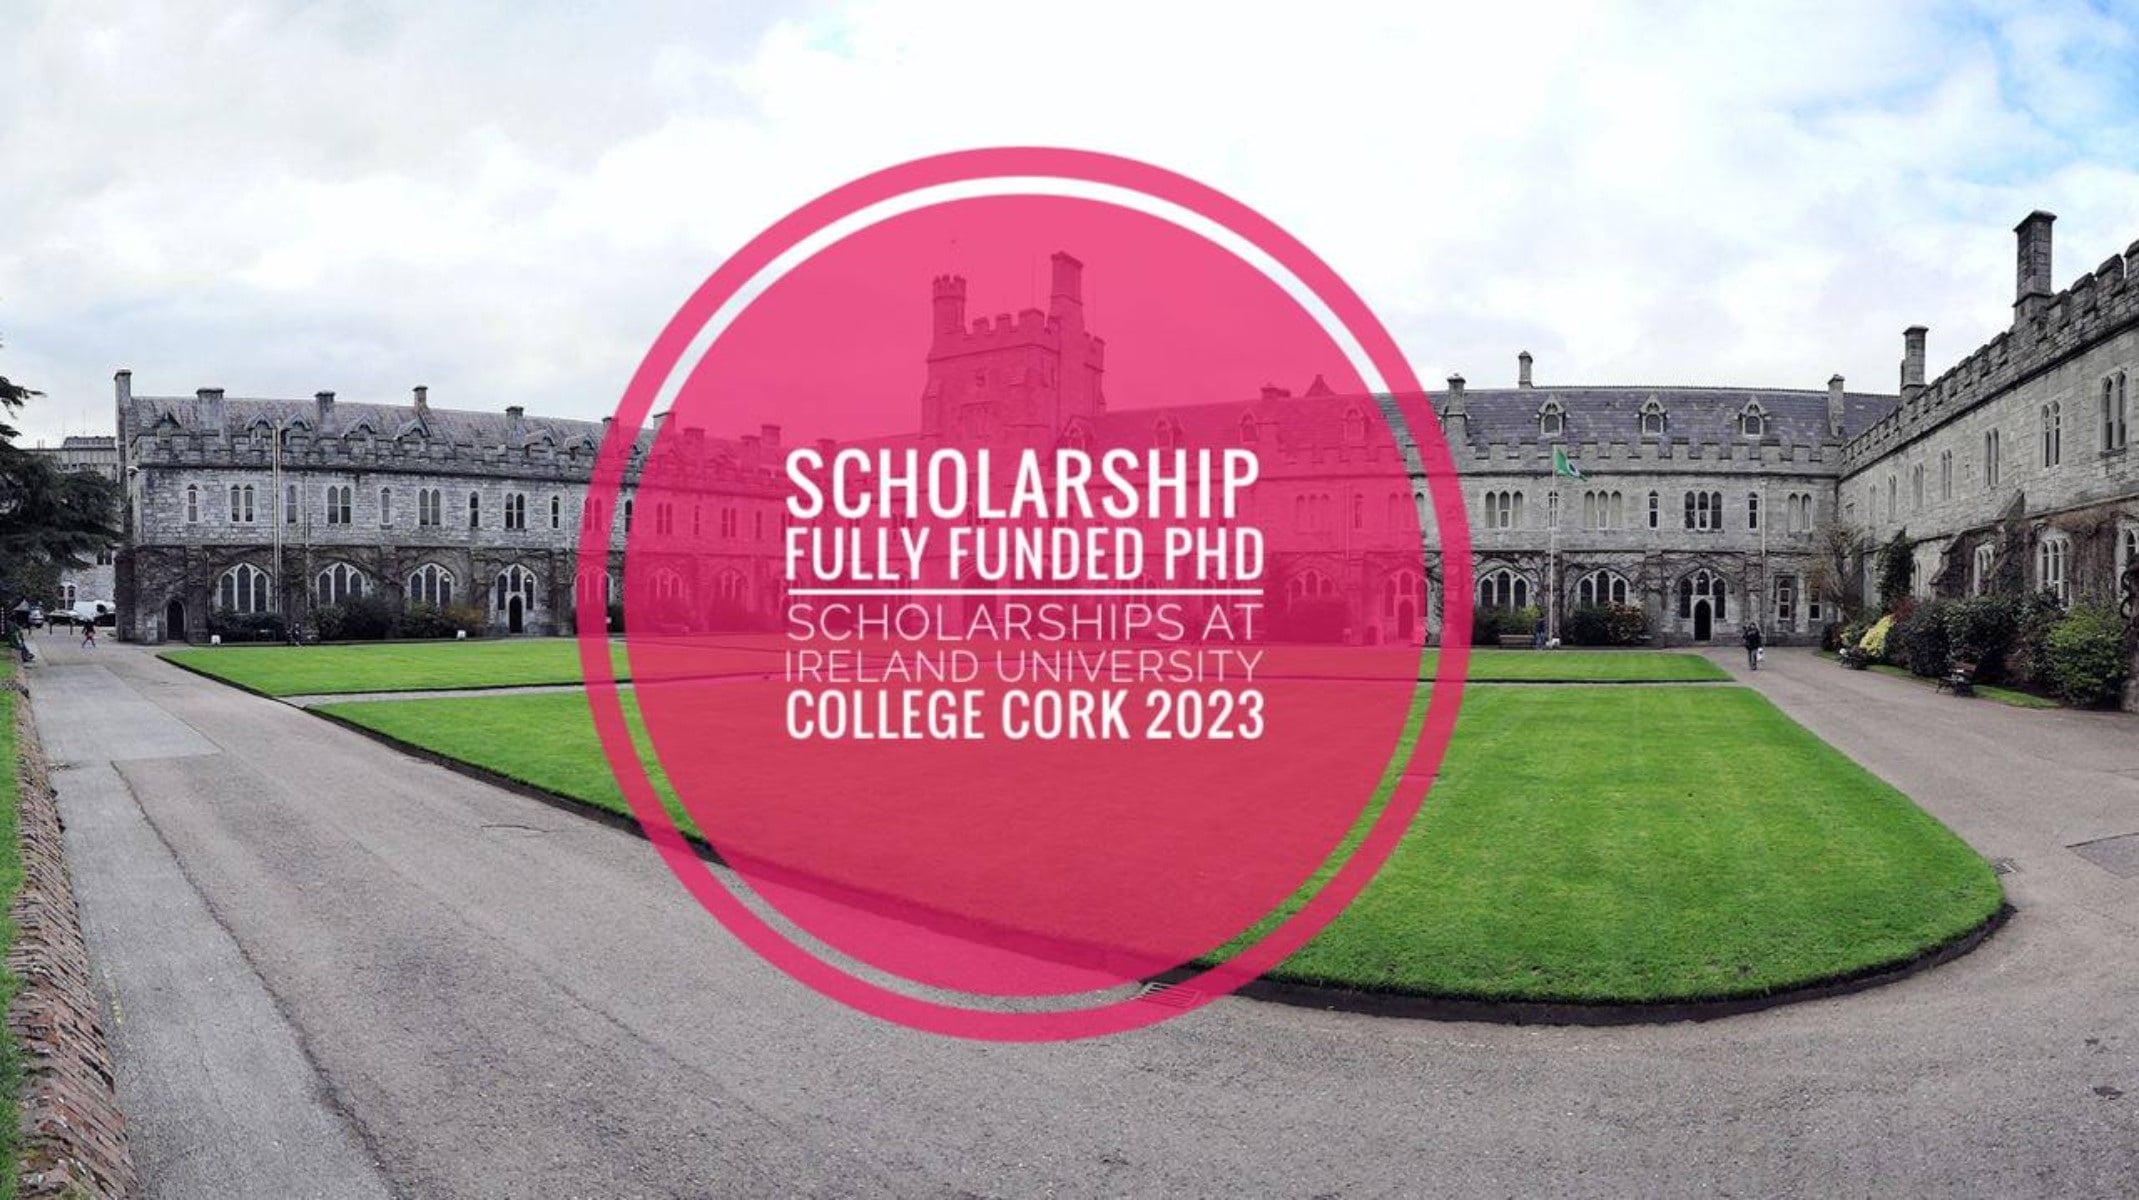 University College Cork Scholarships 2023 for Students from Developing Countries